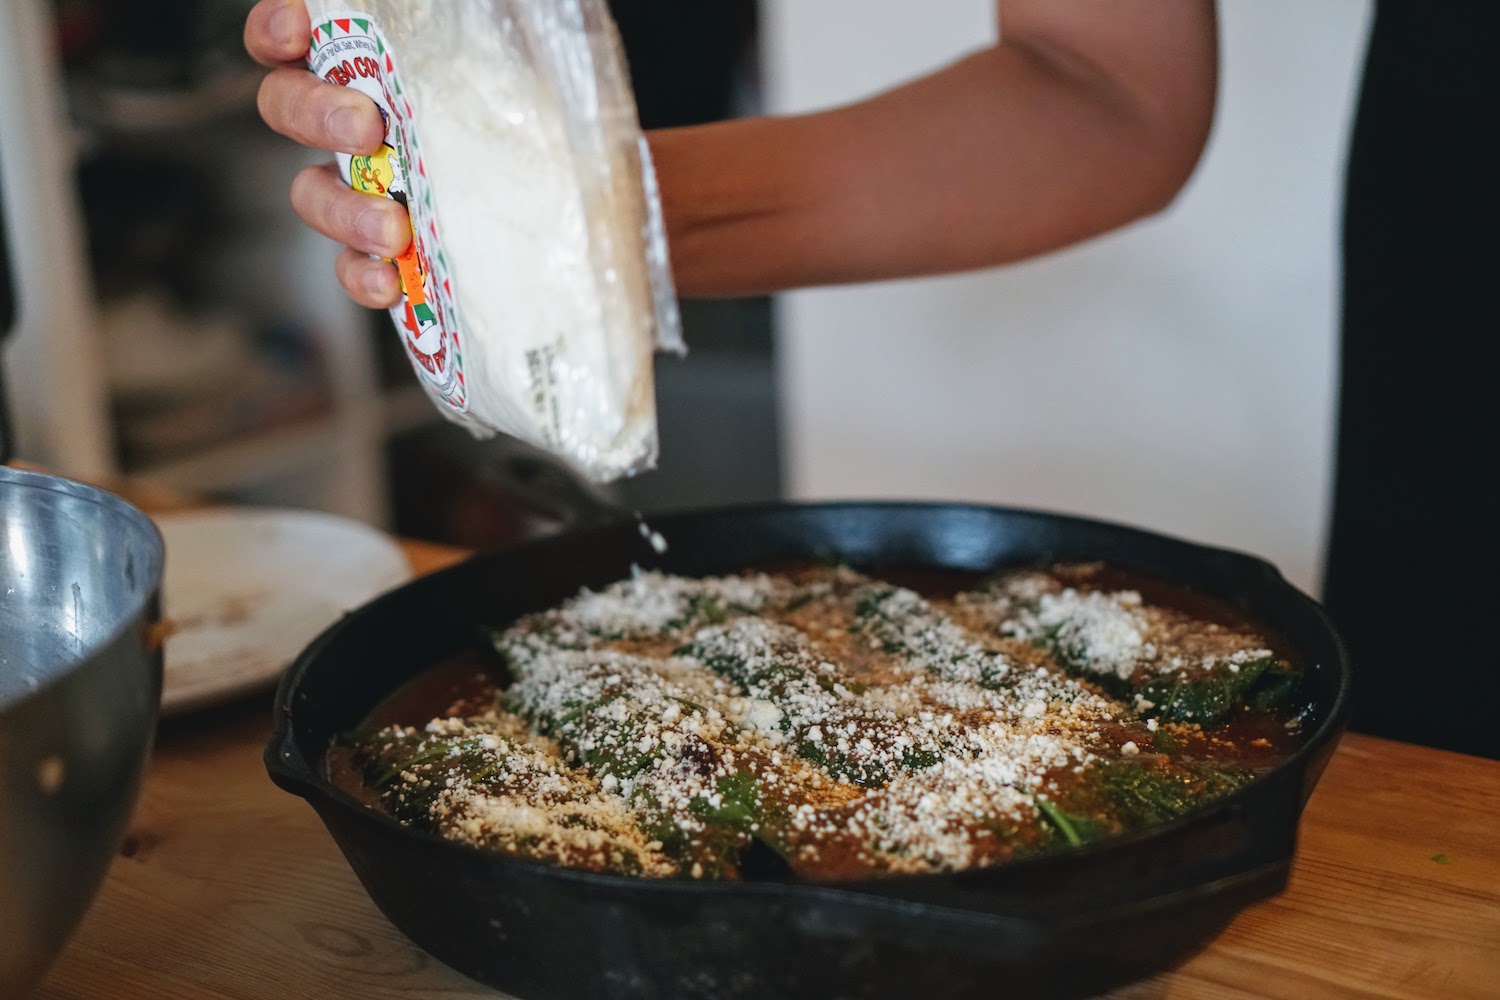 Sprinkling cotija cheese on top of enchiladas in a pan